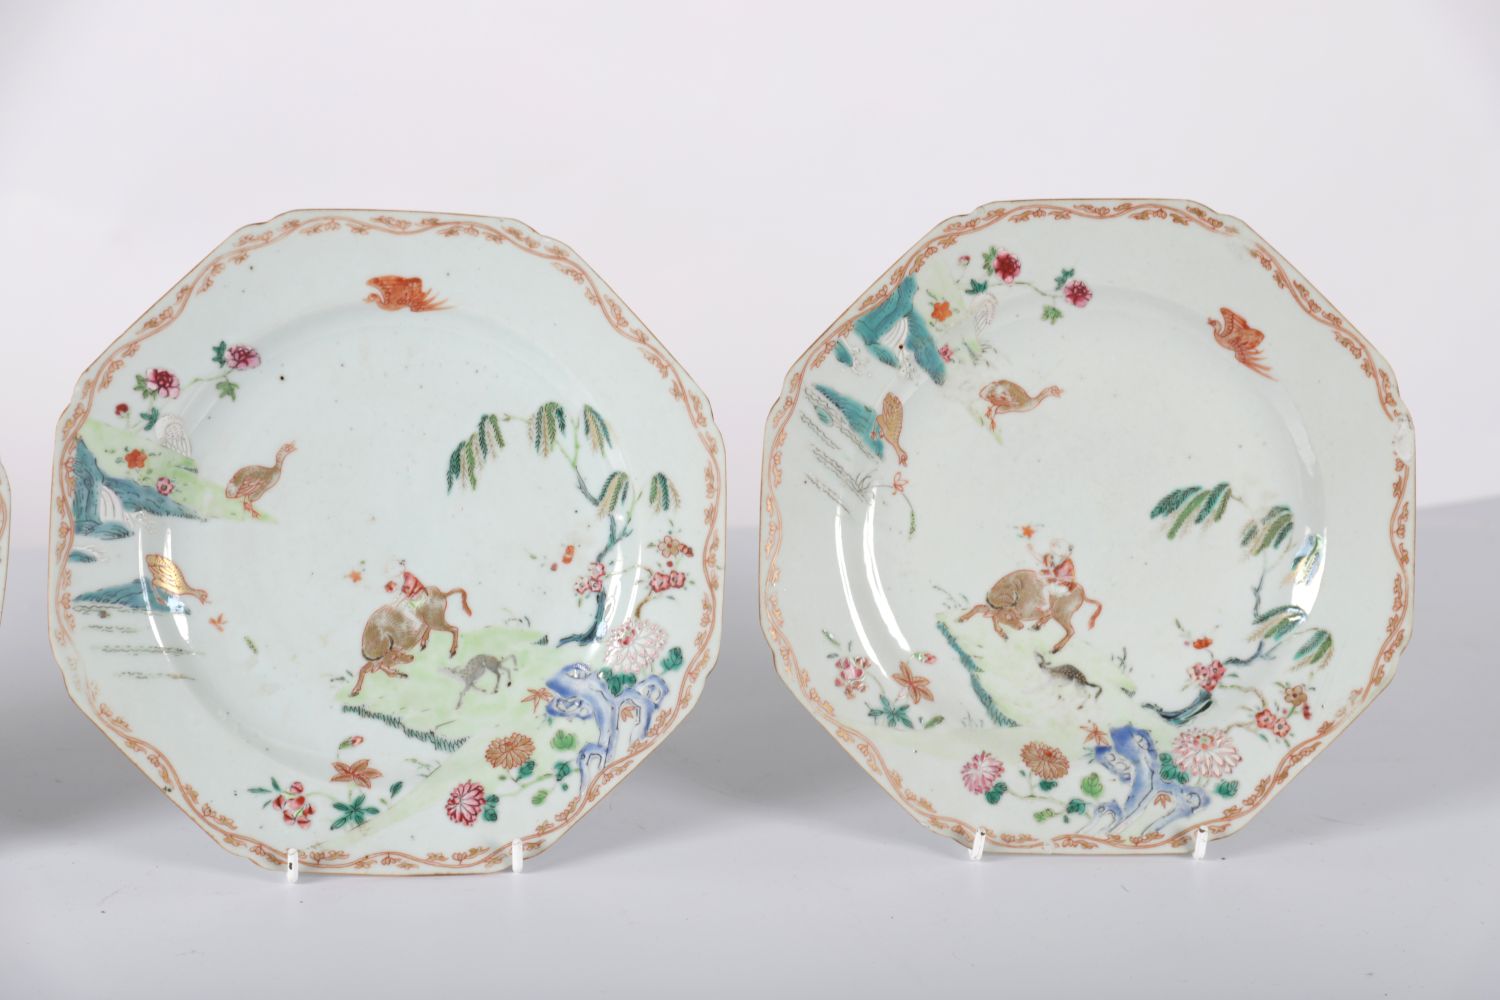 3 18TH-CENTURY CHINESE FAMILLE ROSE PLATES - Image 3 of 3